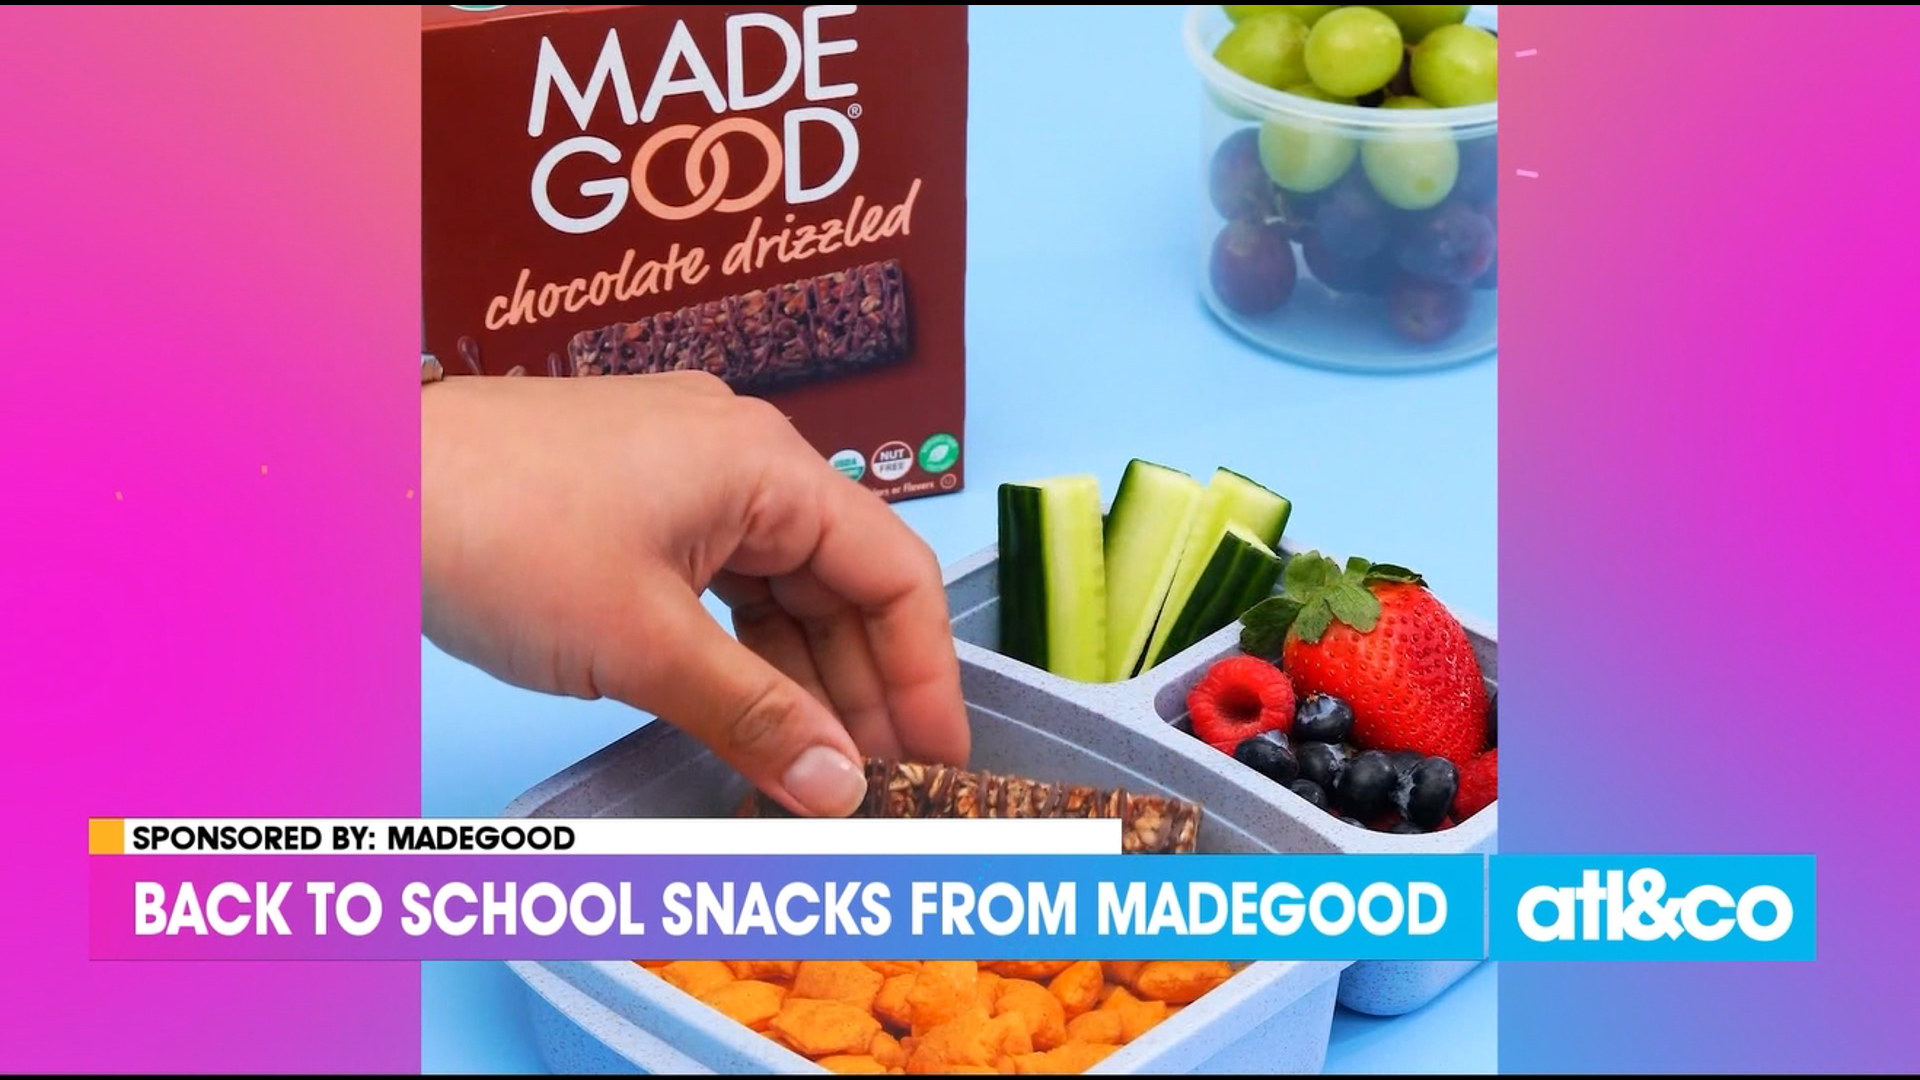 Lifestyle expert Alison Deyette shares nutritious snacks from MadeGood the kids will love.